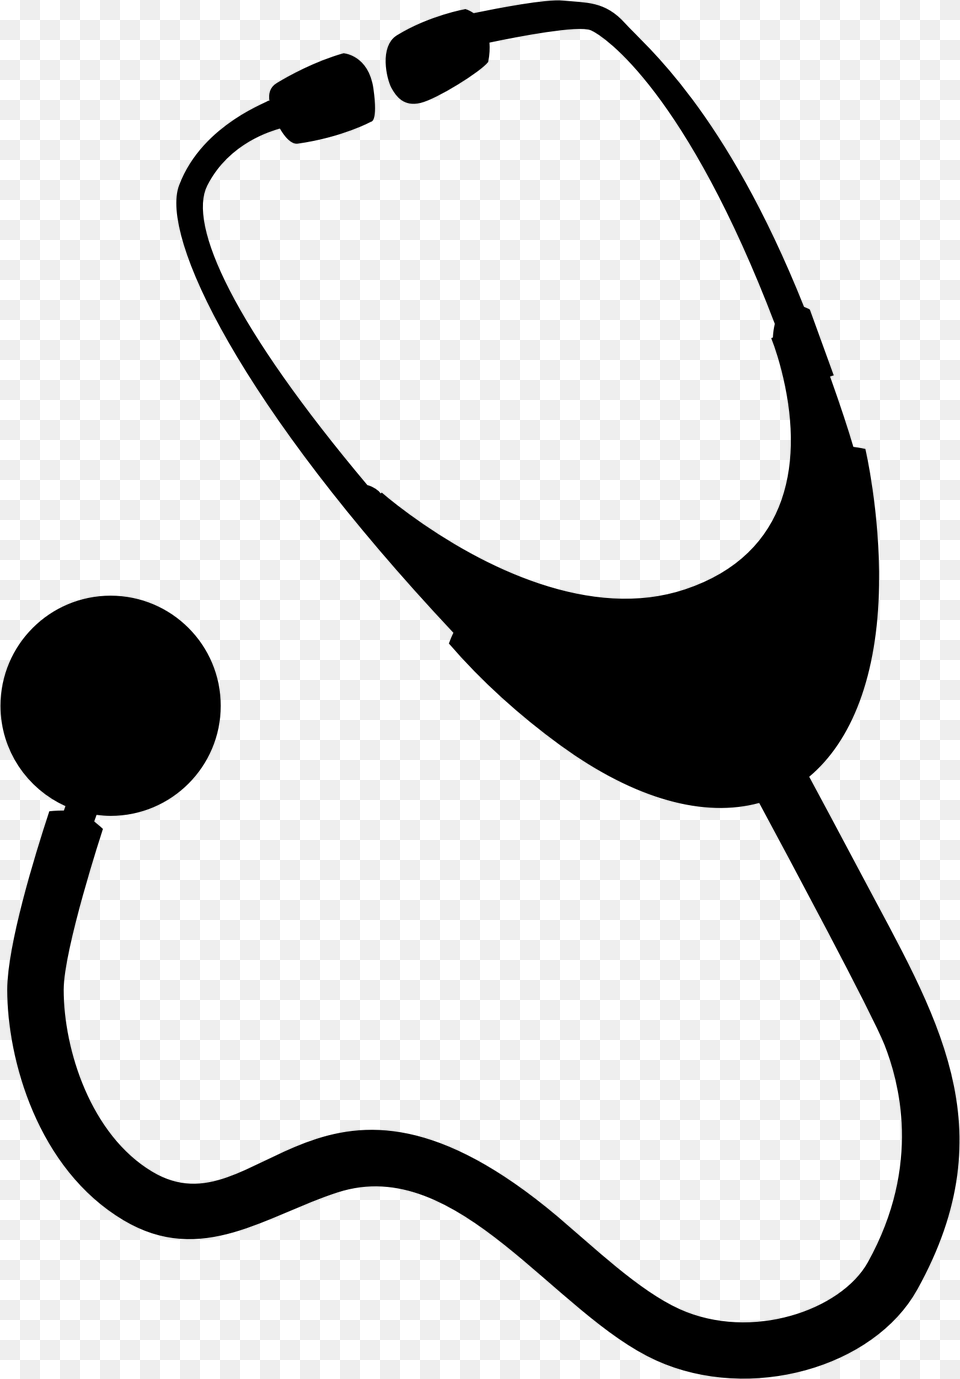 This Icons Design Of Nasa Stethoscope Silhouette, Gray Free Png